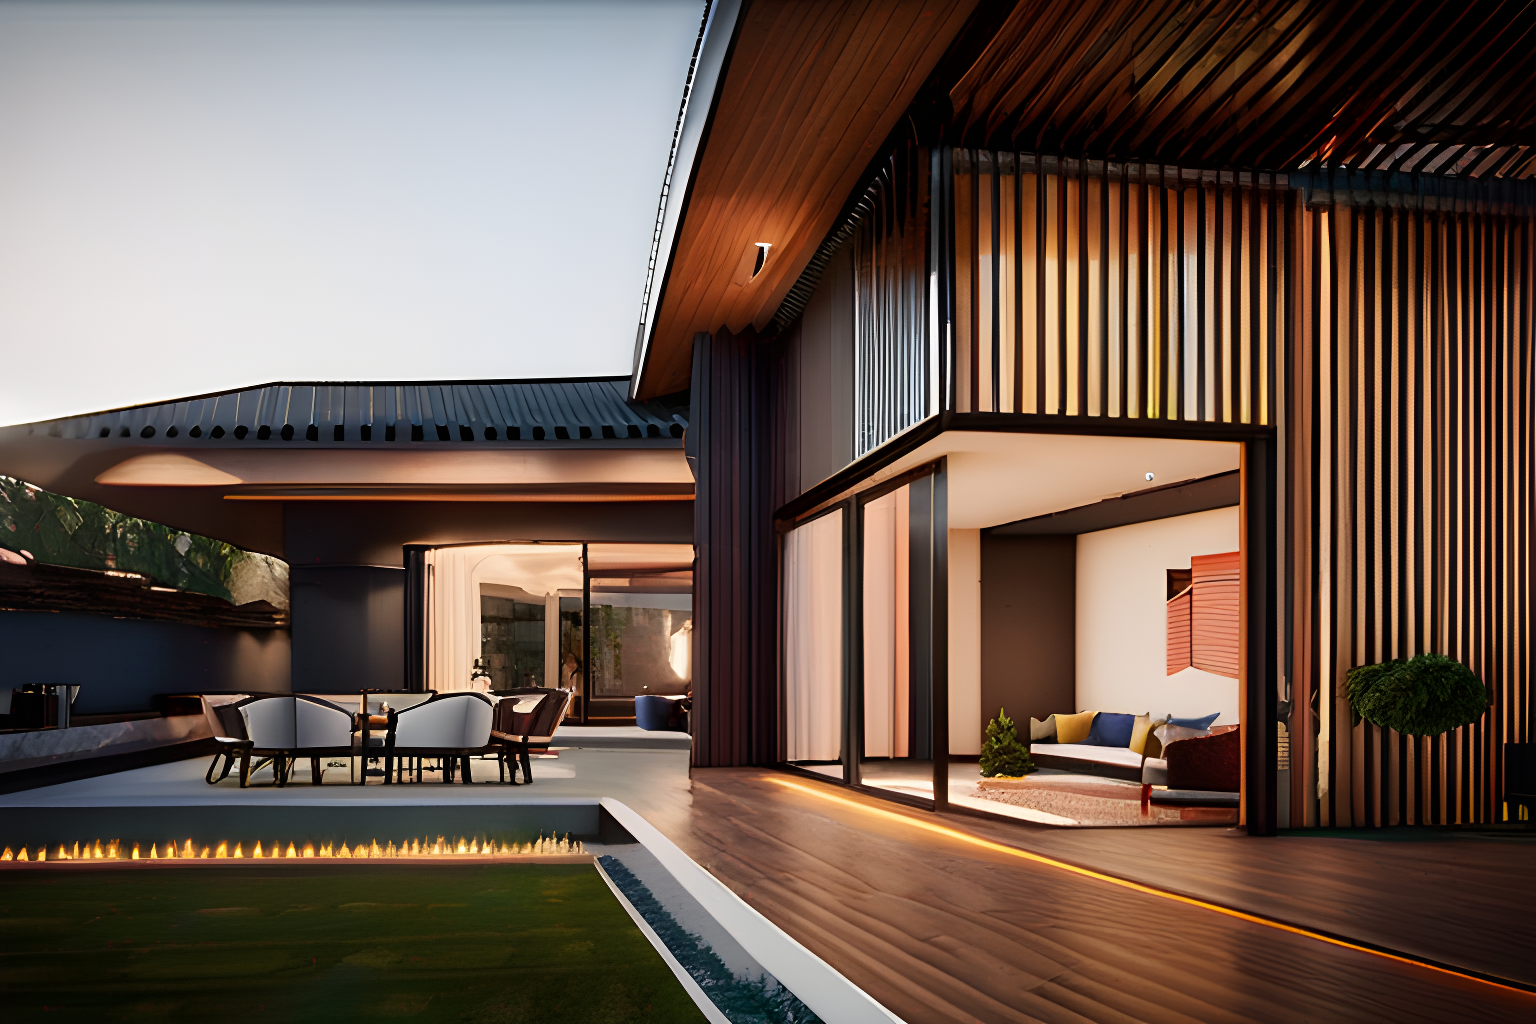 Using unreal engine in house design